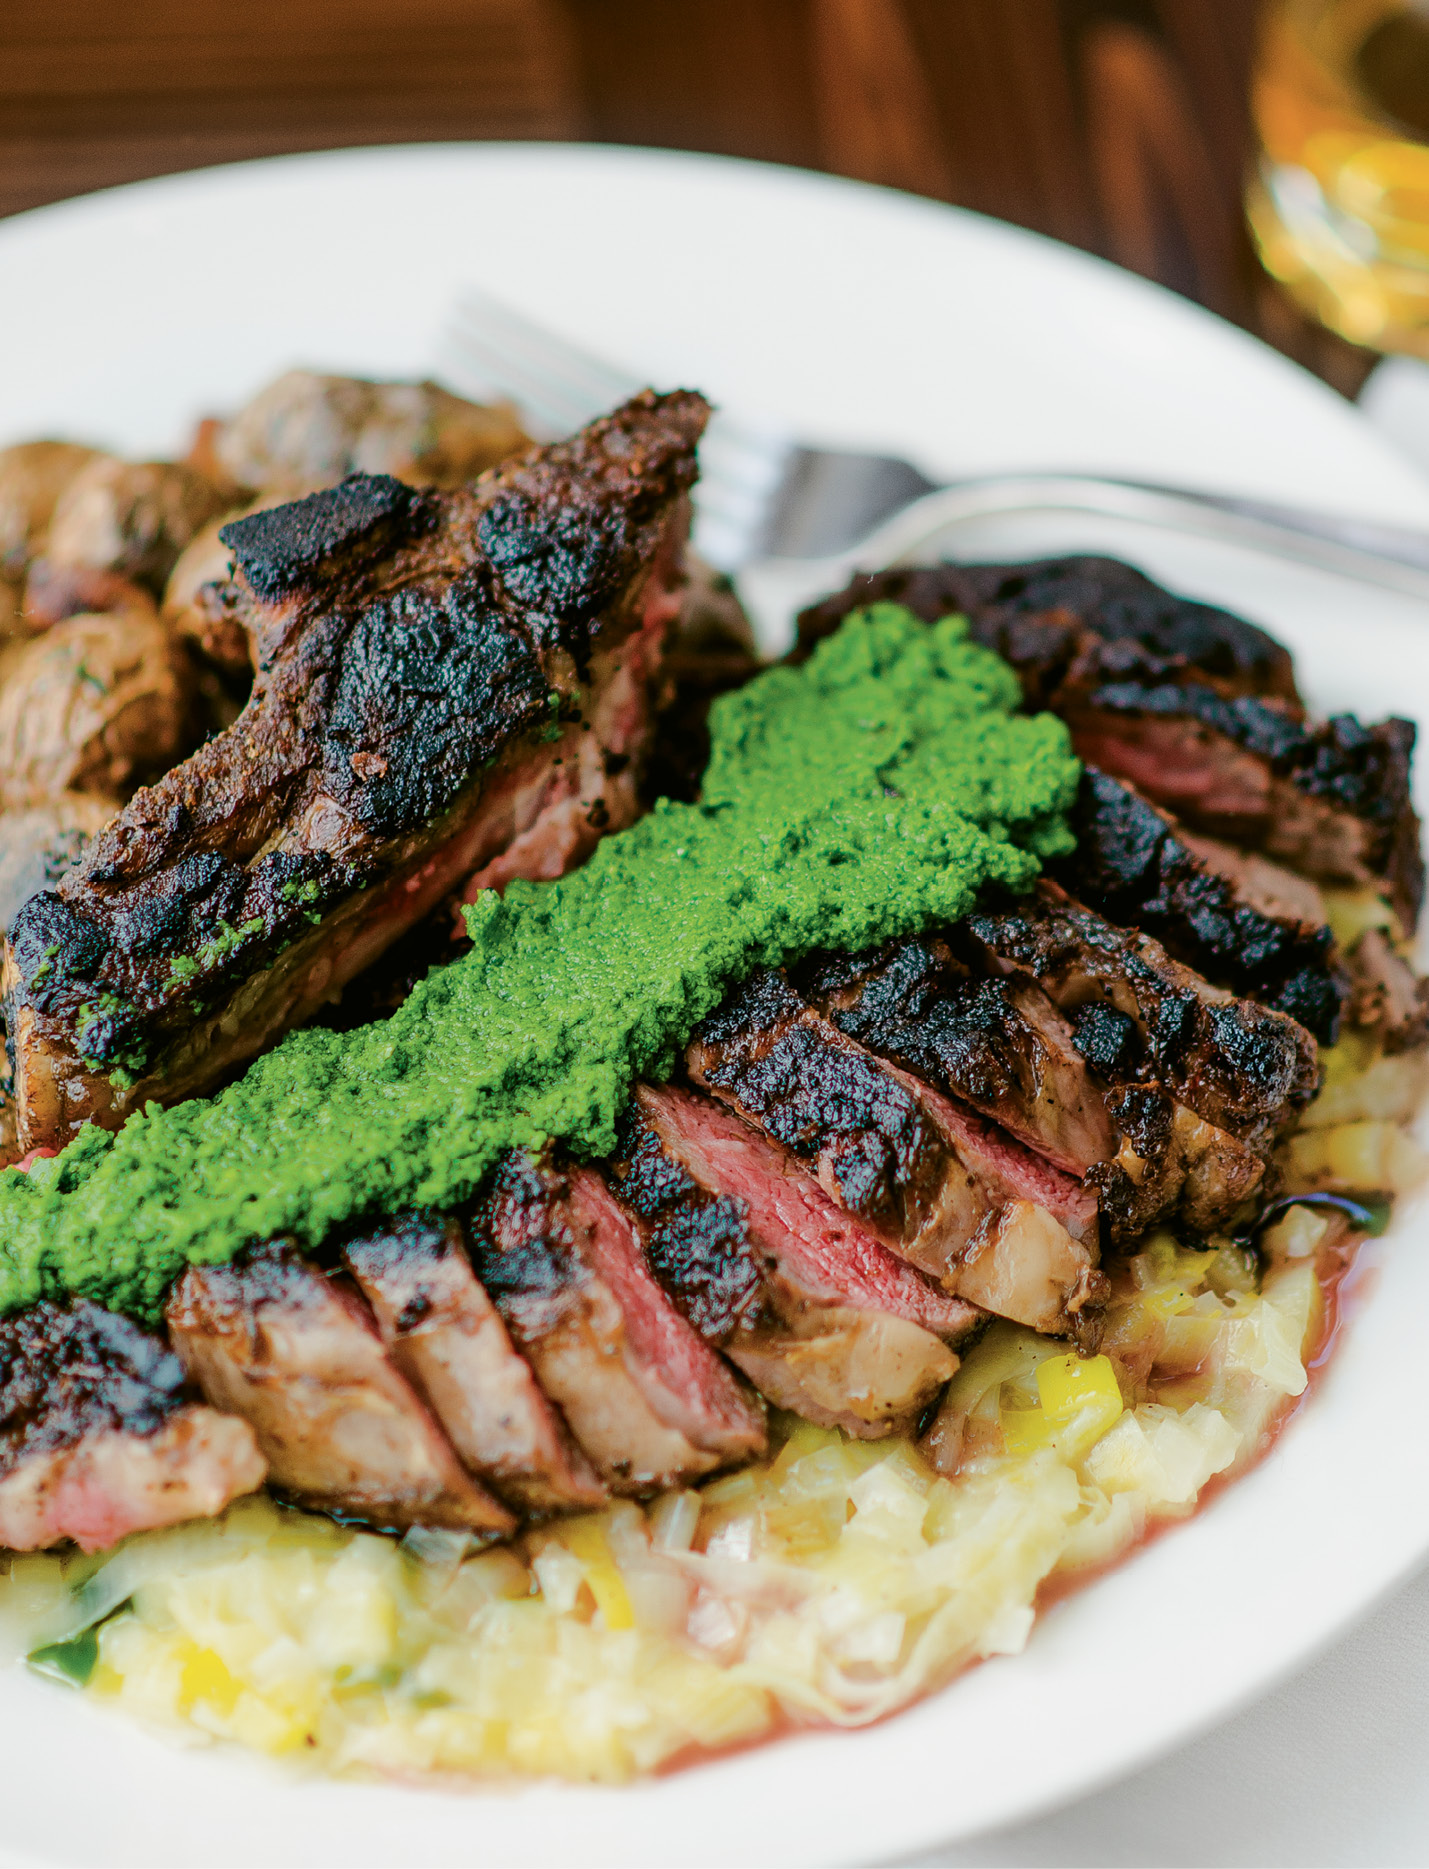 Dinner for Two: The salsa verde adds acidity and a dash of color to the rib eye